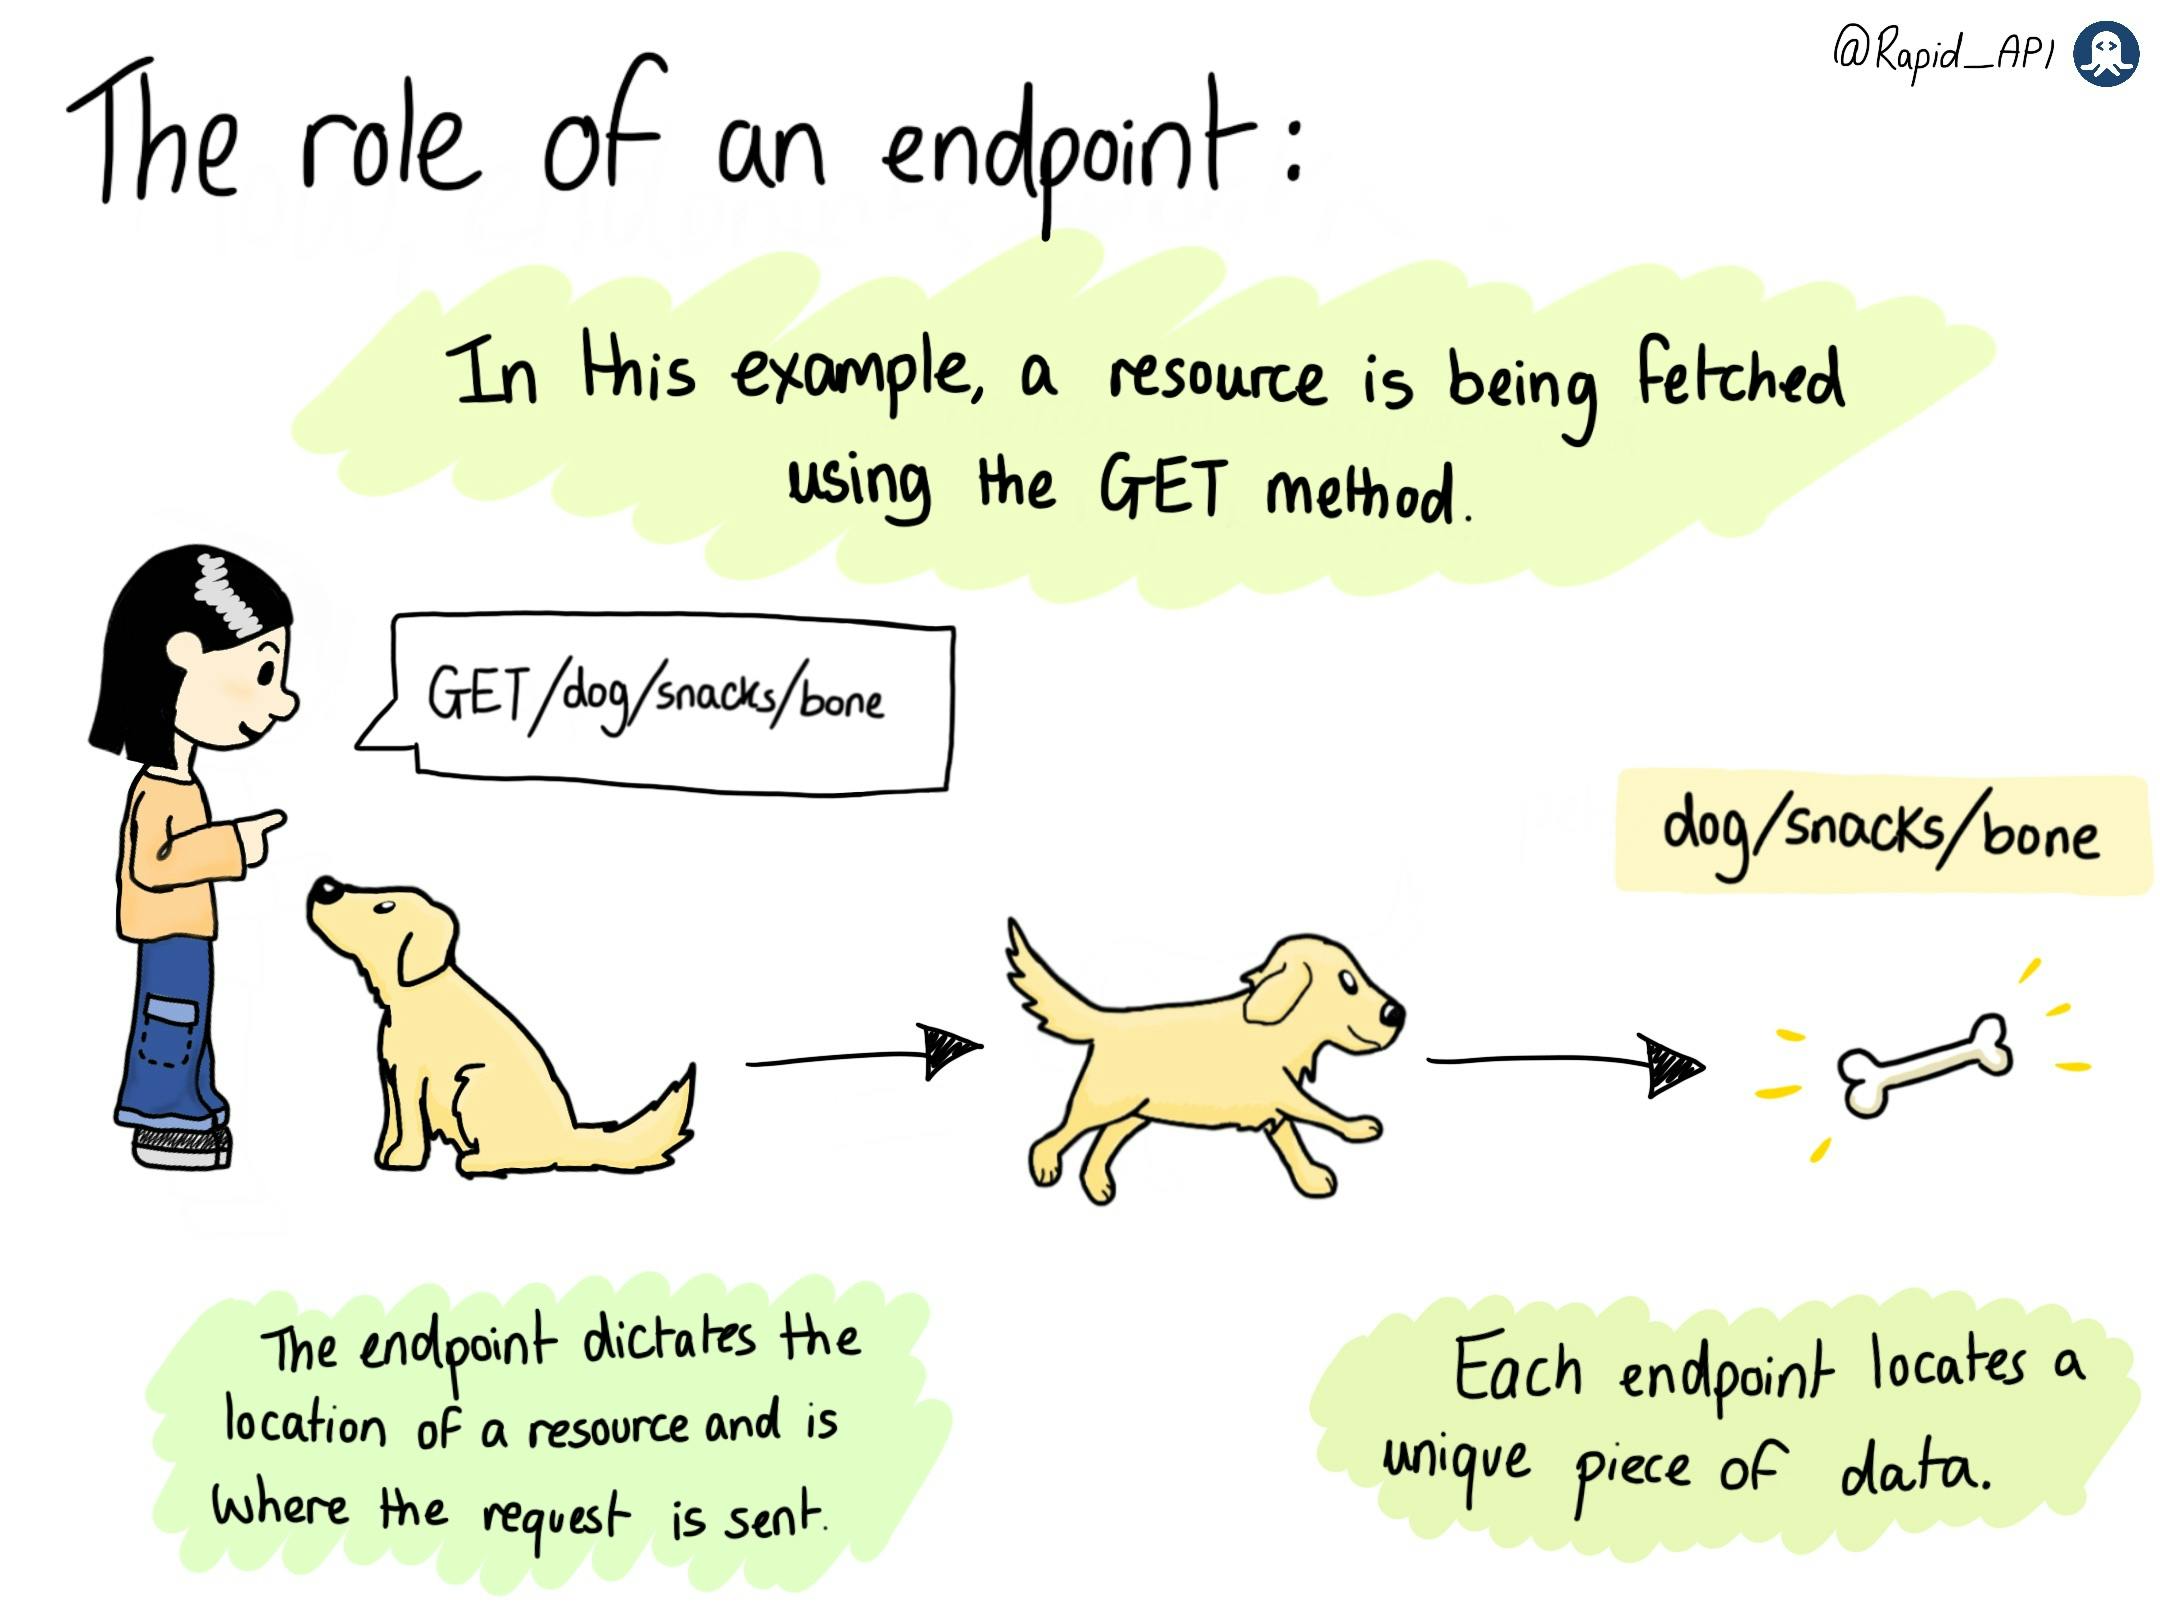 Endpoint's Role